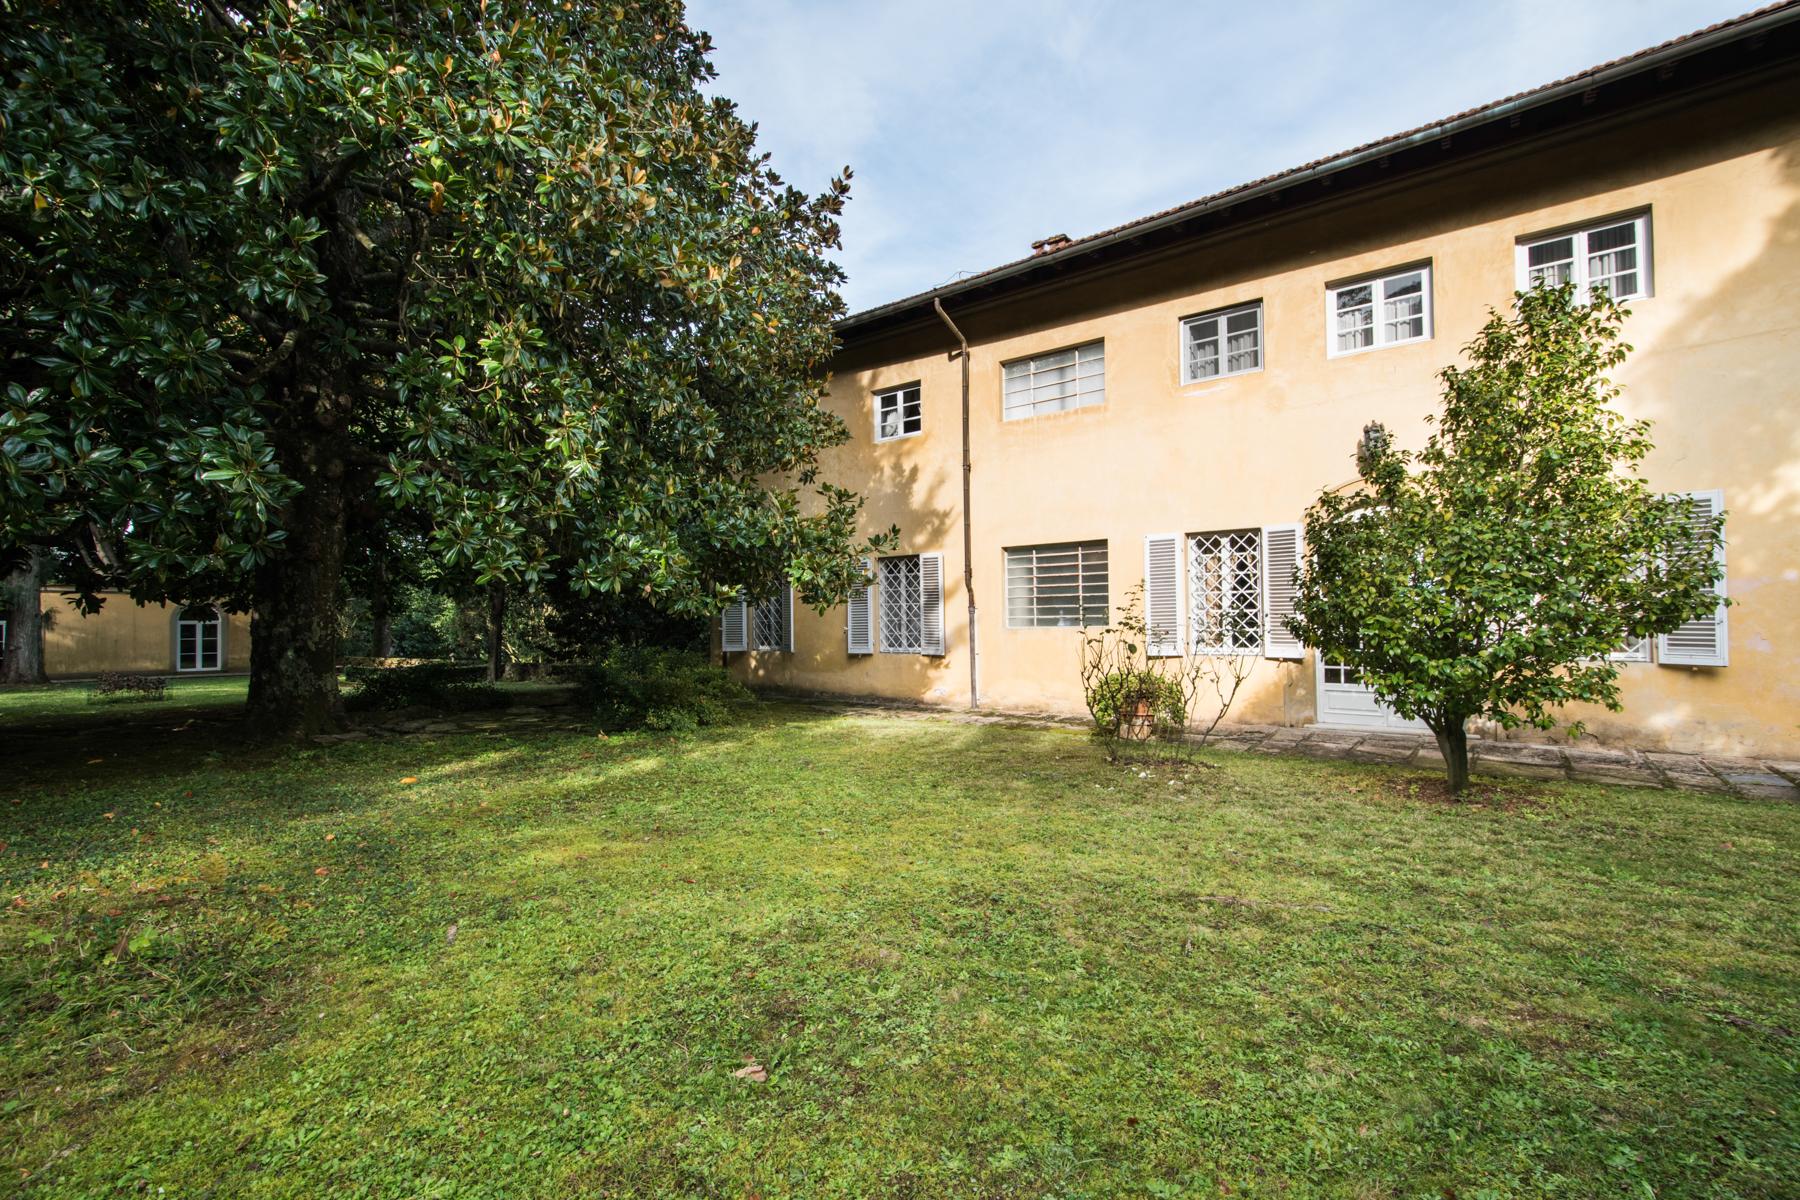 Charming 18th century villa in Lucca countryside - 23